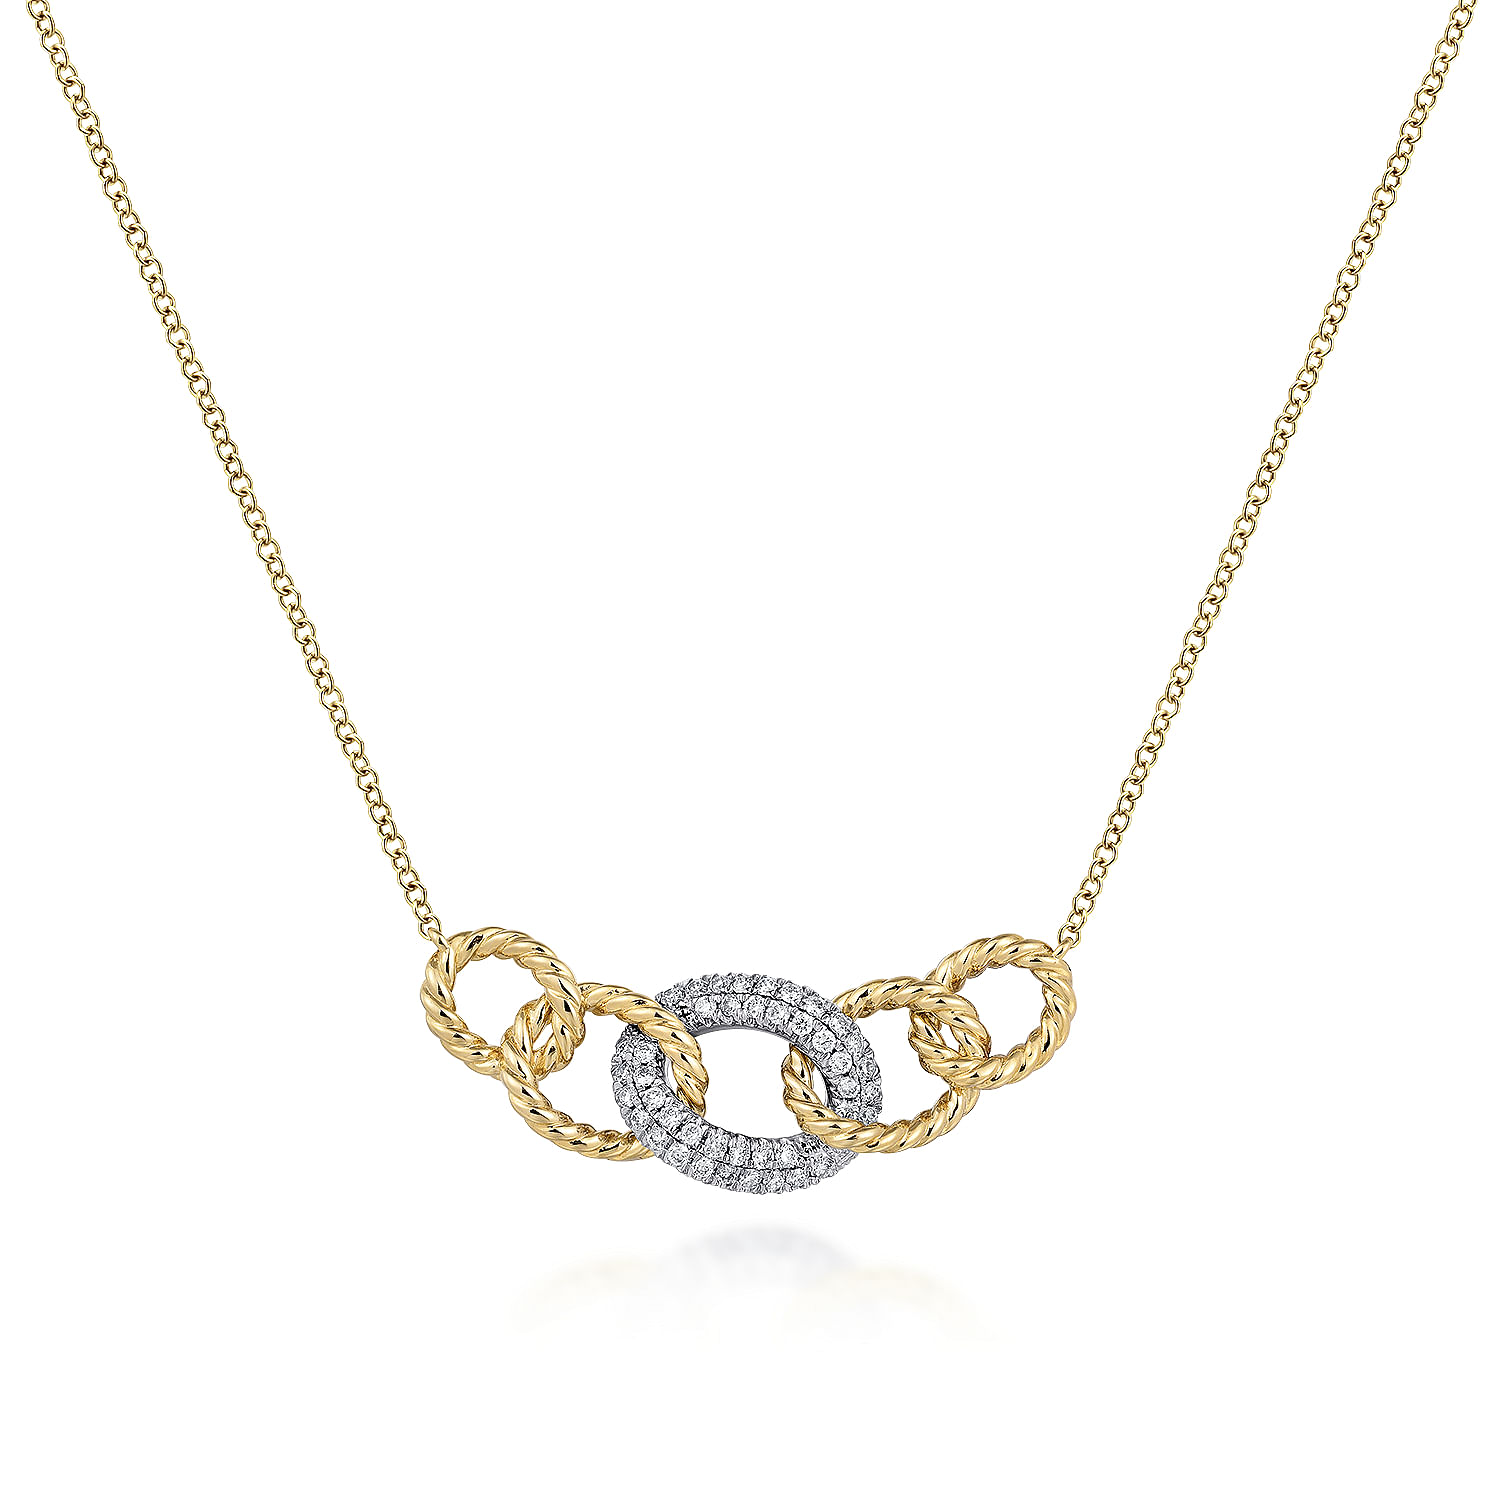 14K Yellow-White Gold Twisted Rope Link Necklace with Pave Diamond Link Station